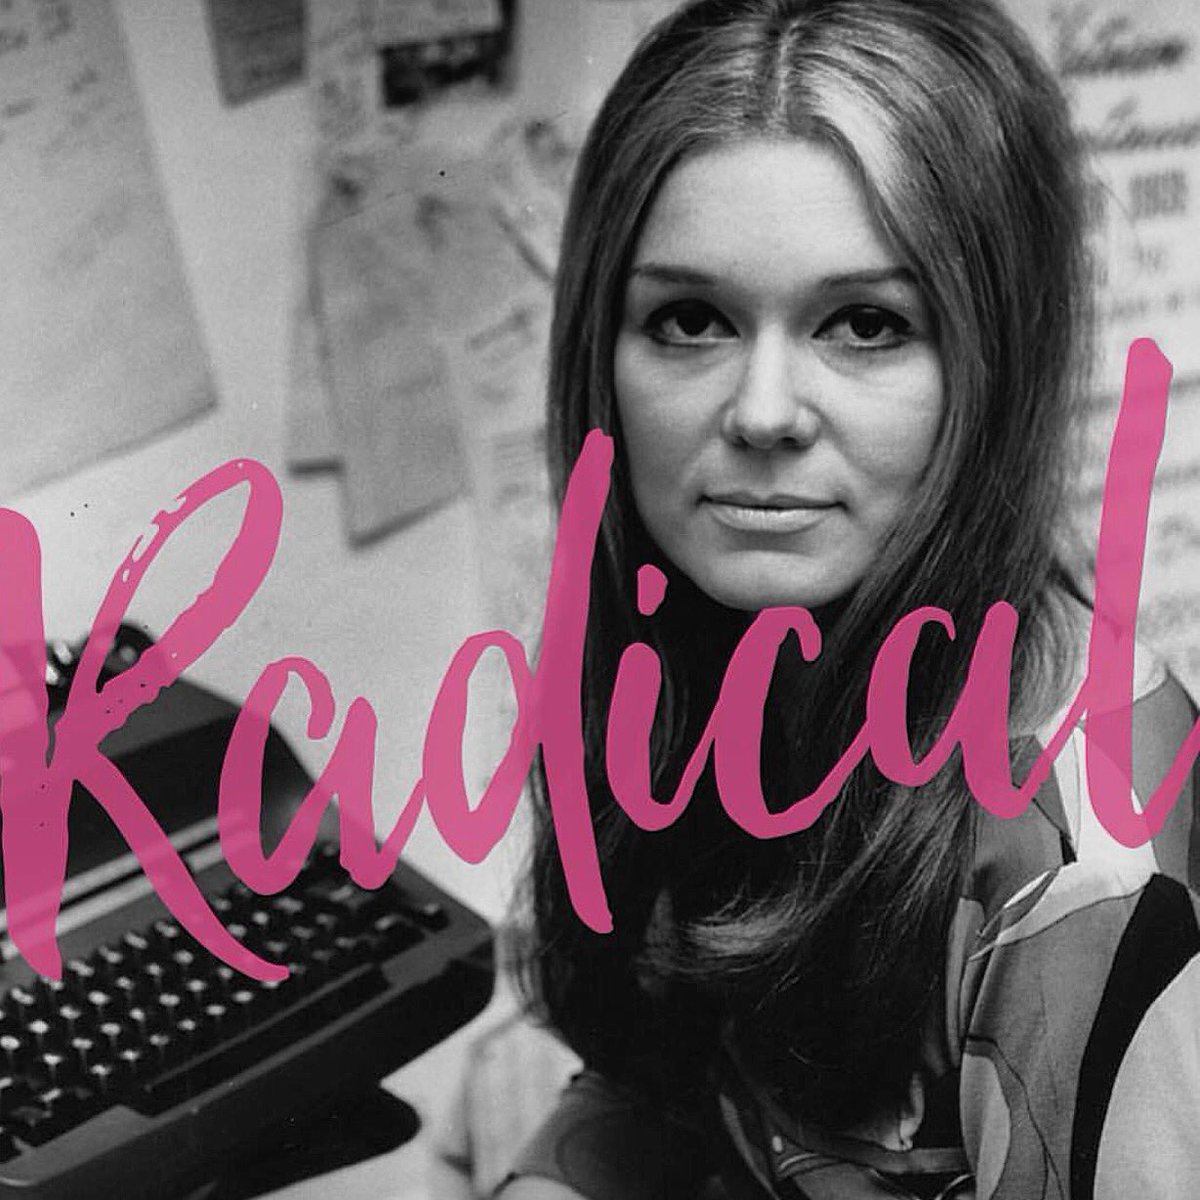 Happy Birthday #GloriaSteinem! Let's celebrate women everywhere who stand for #GenderEquality and #SocialChange. 🙋💪